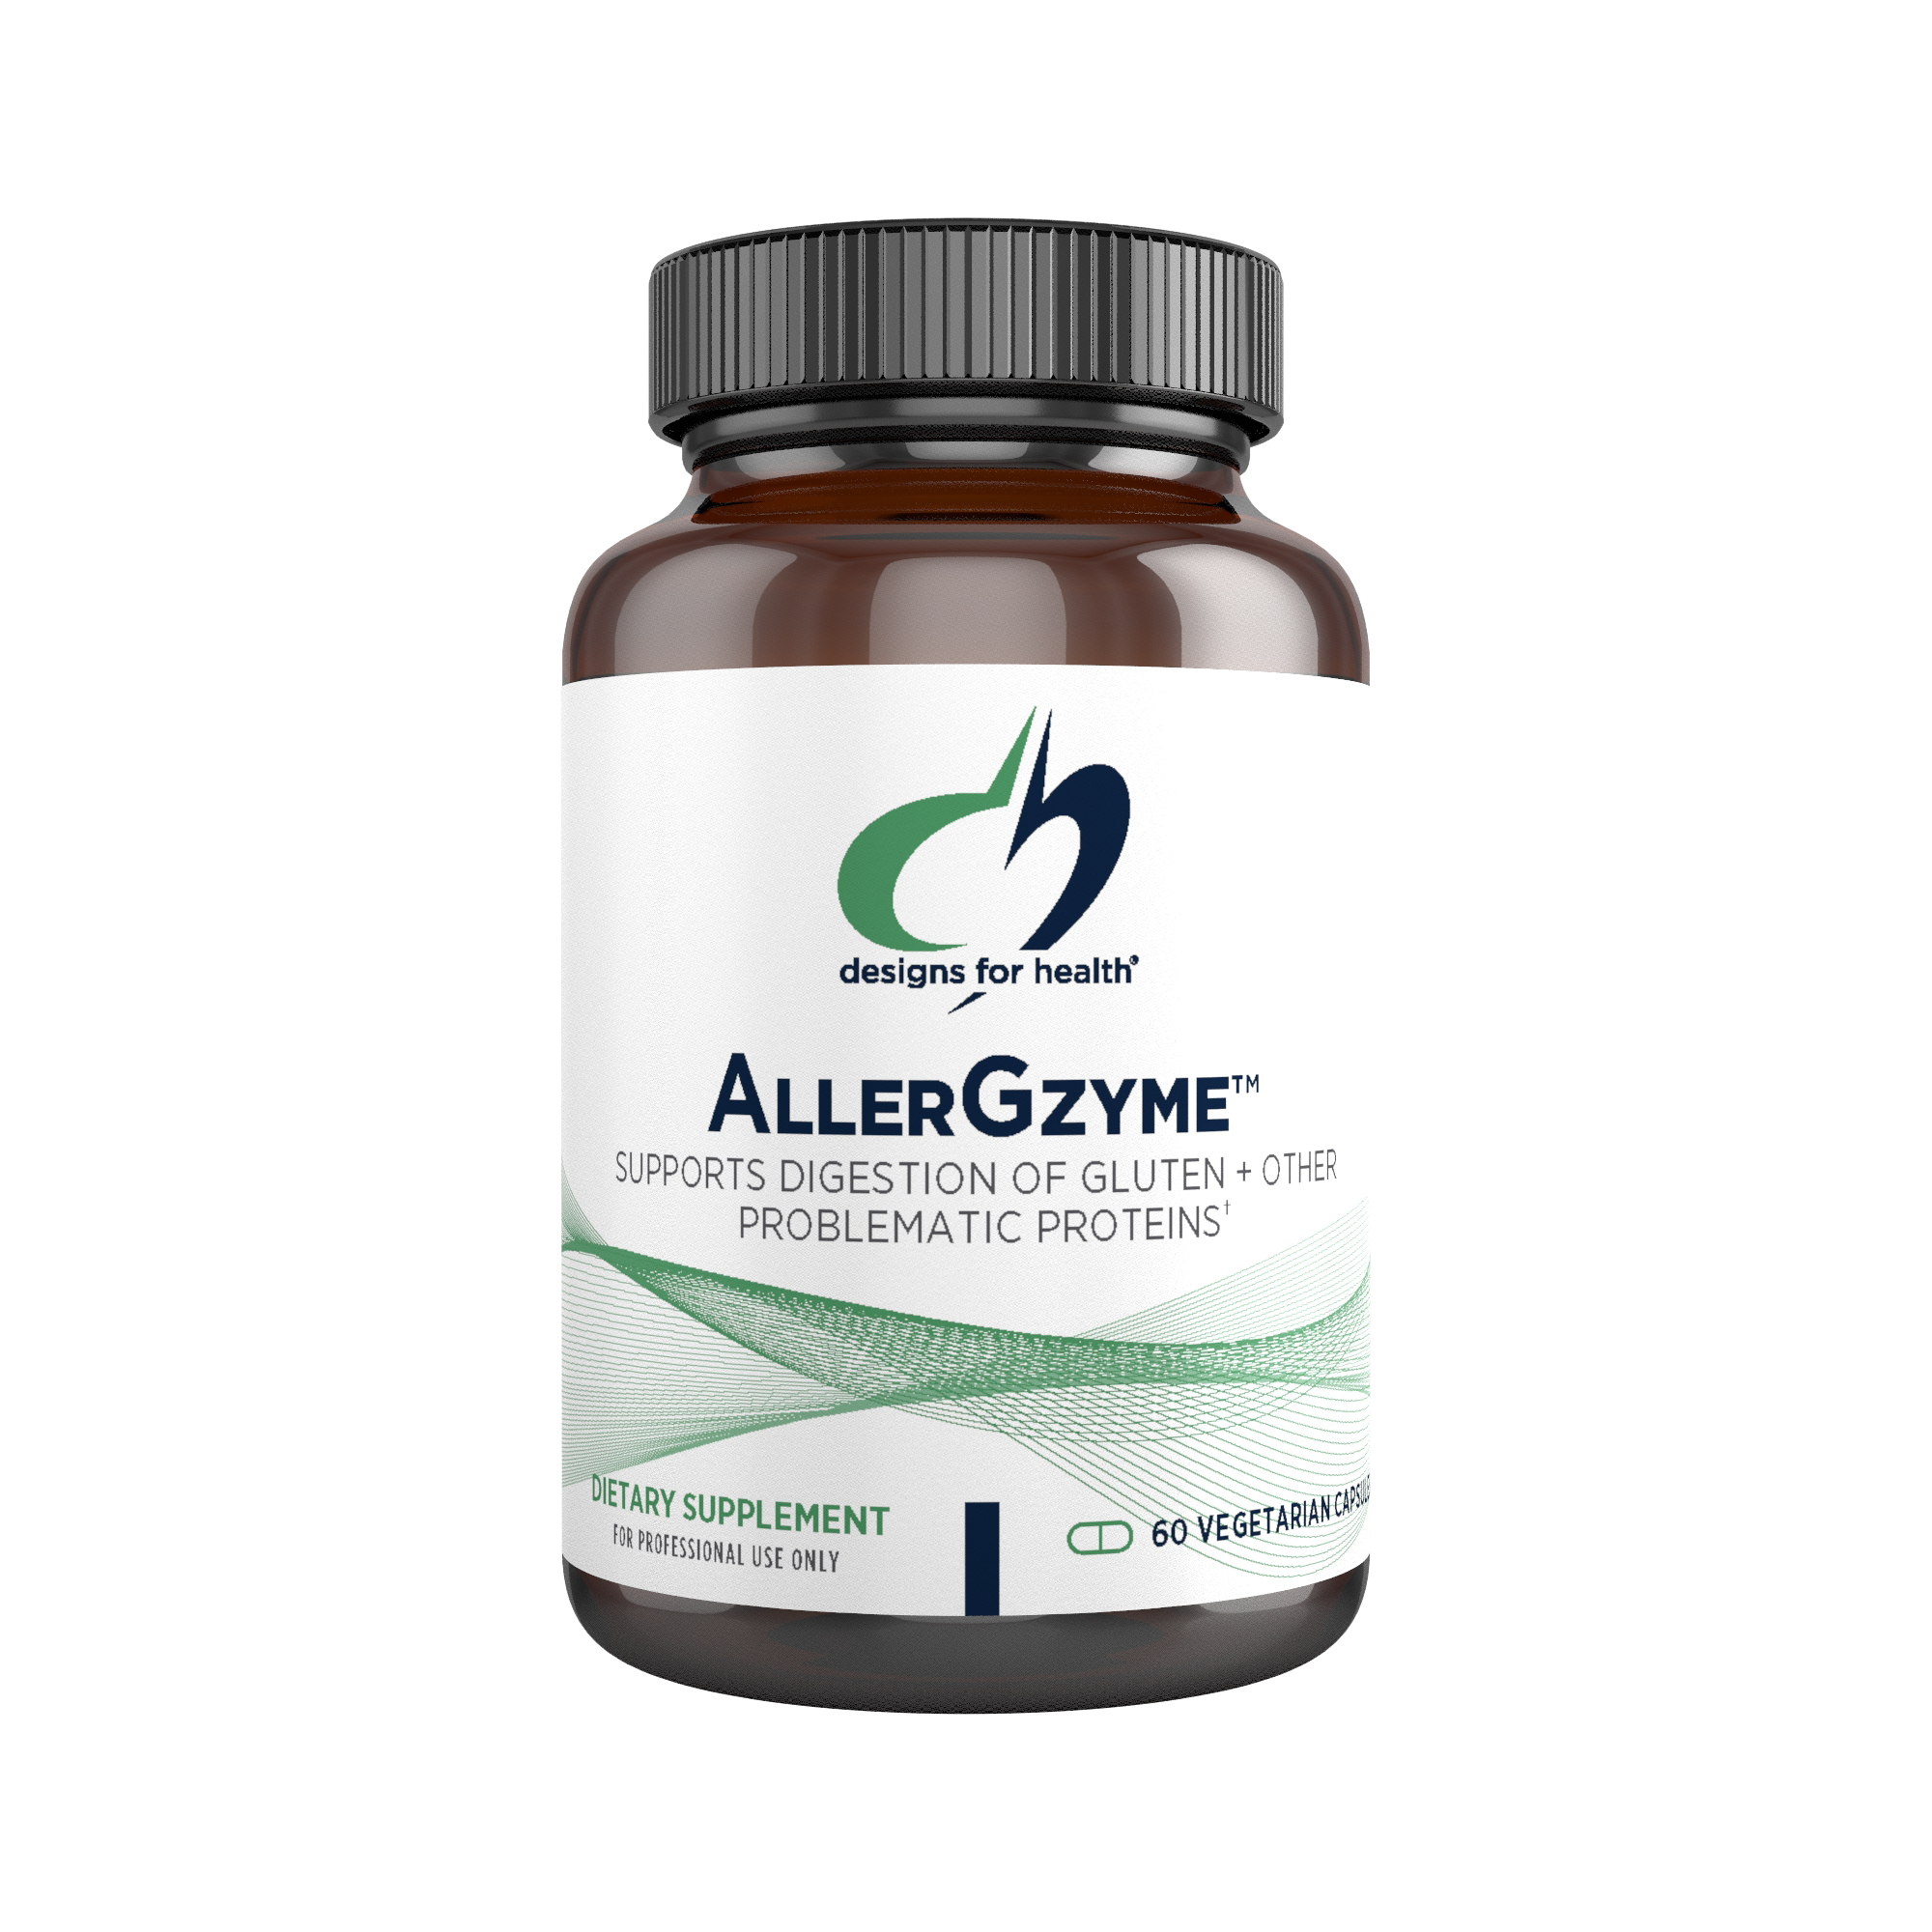 AllerGzyme™